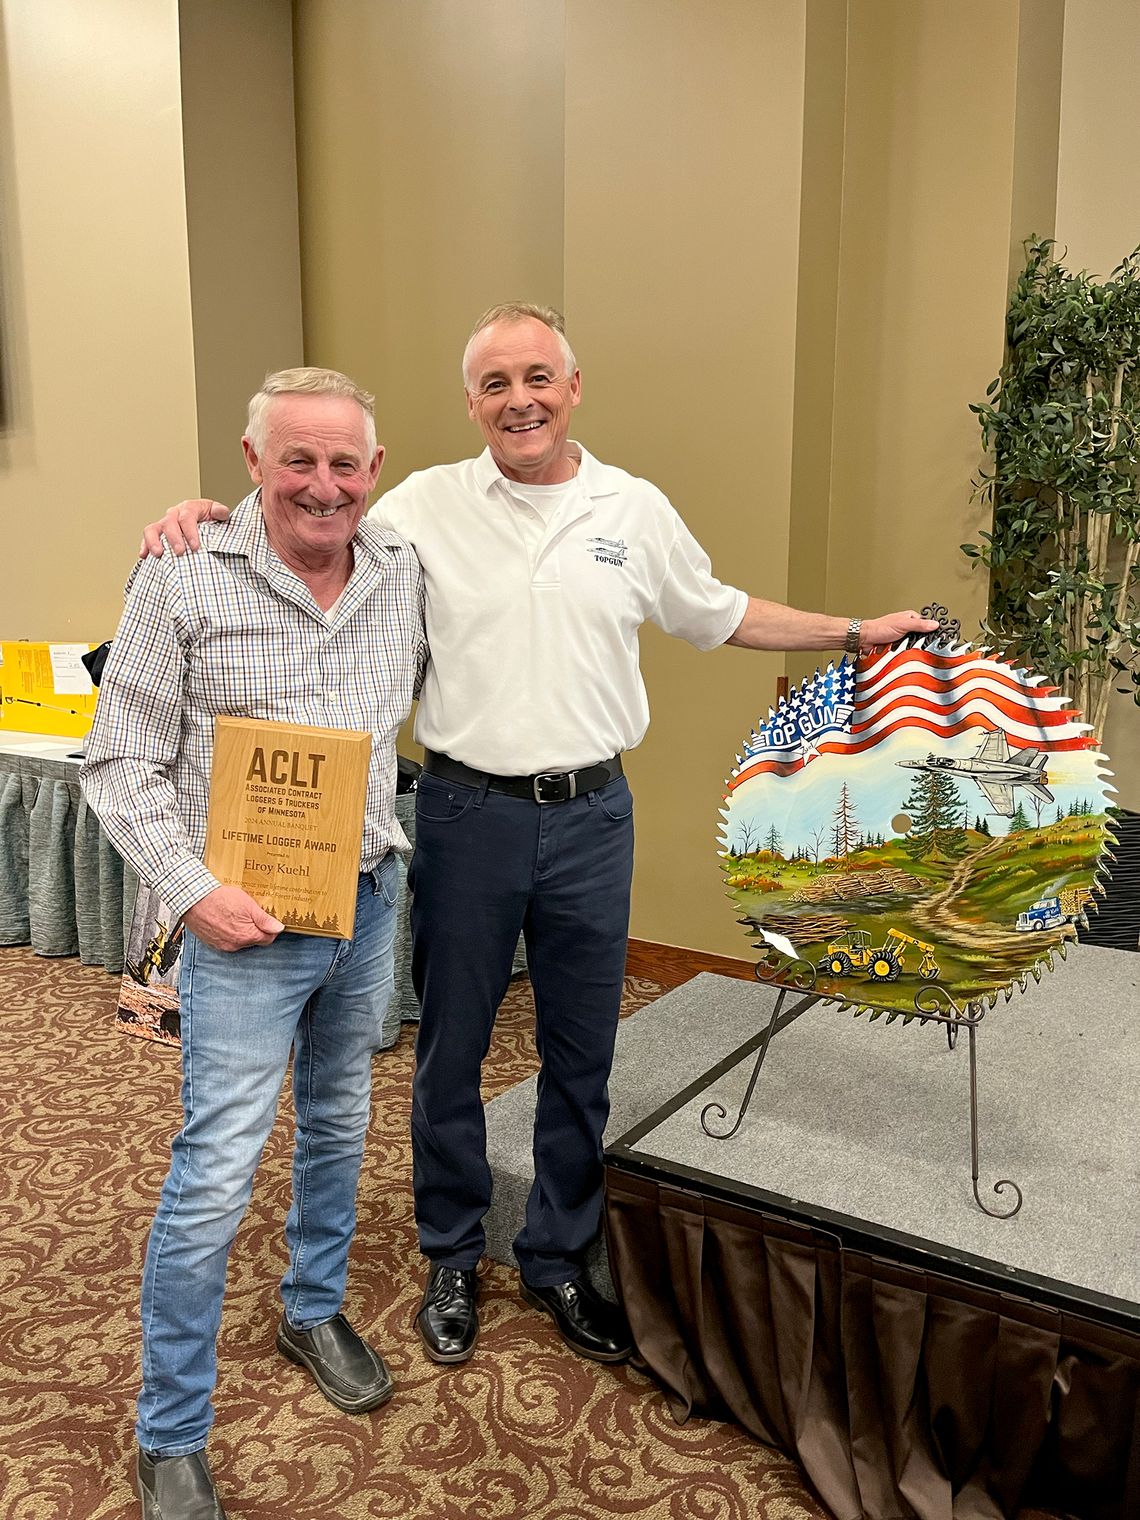 Ely connection: James Kuehl speaks at ACLT banquet, Elroy Kuehl given award for lifetime support of logging